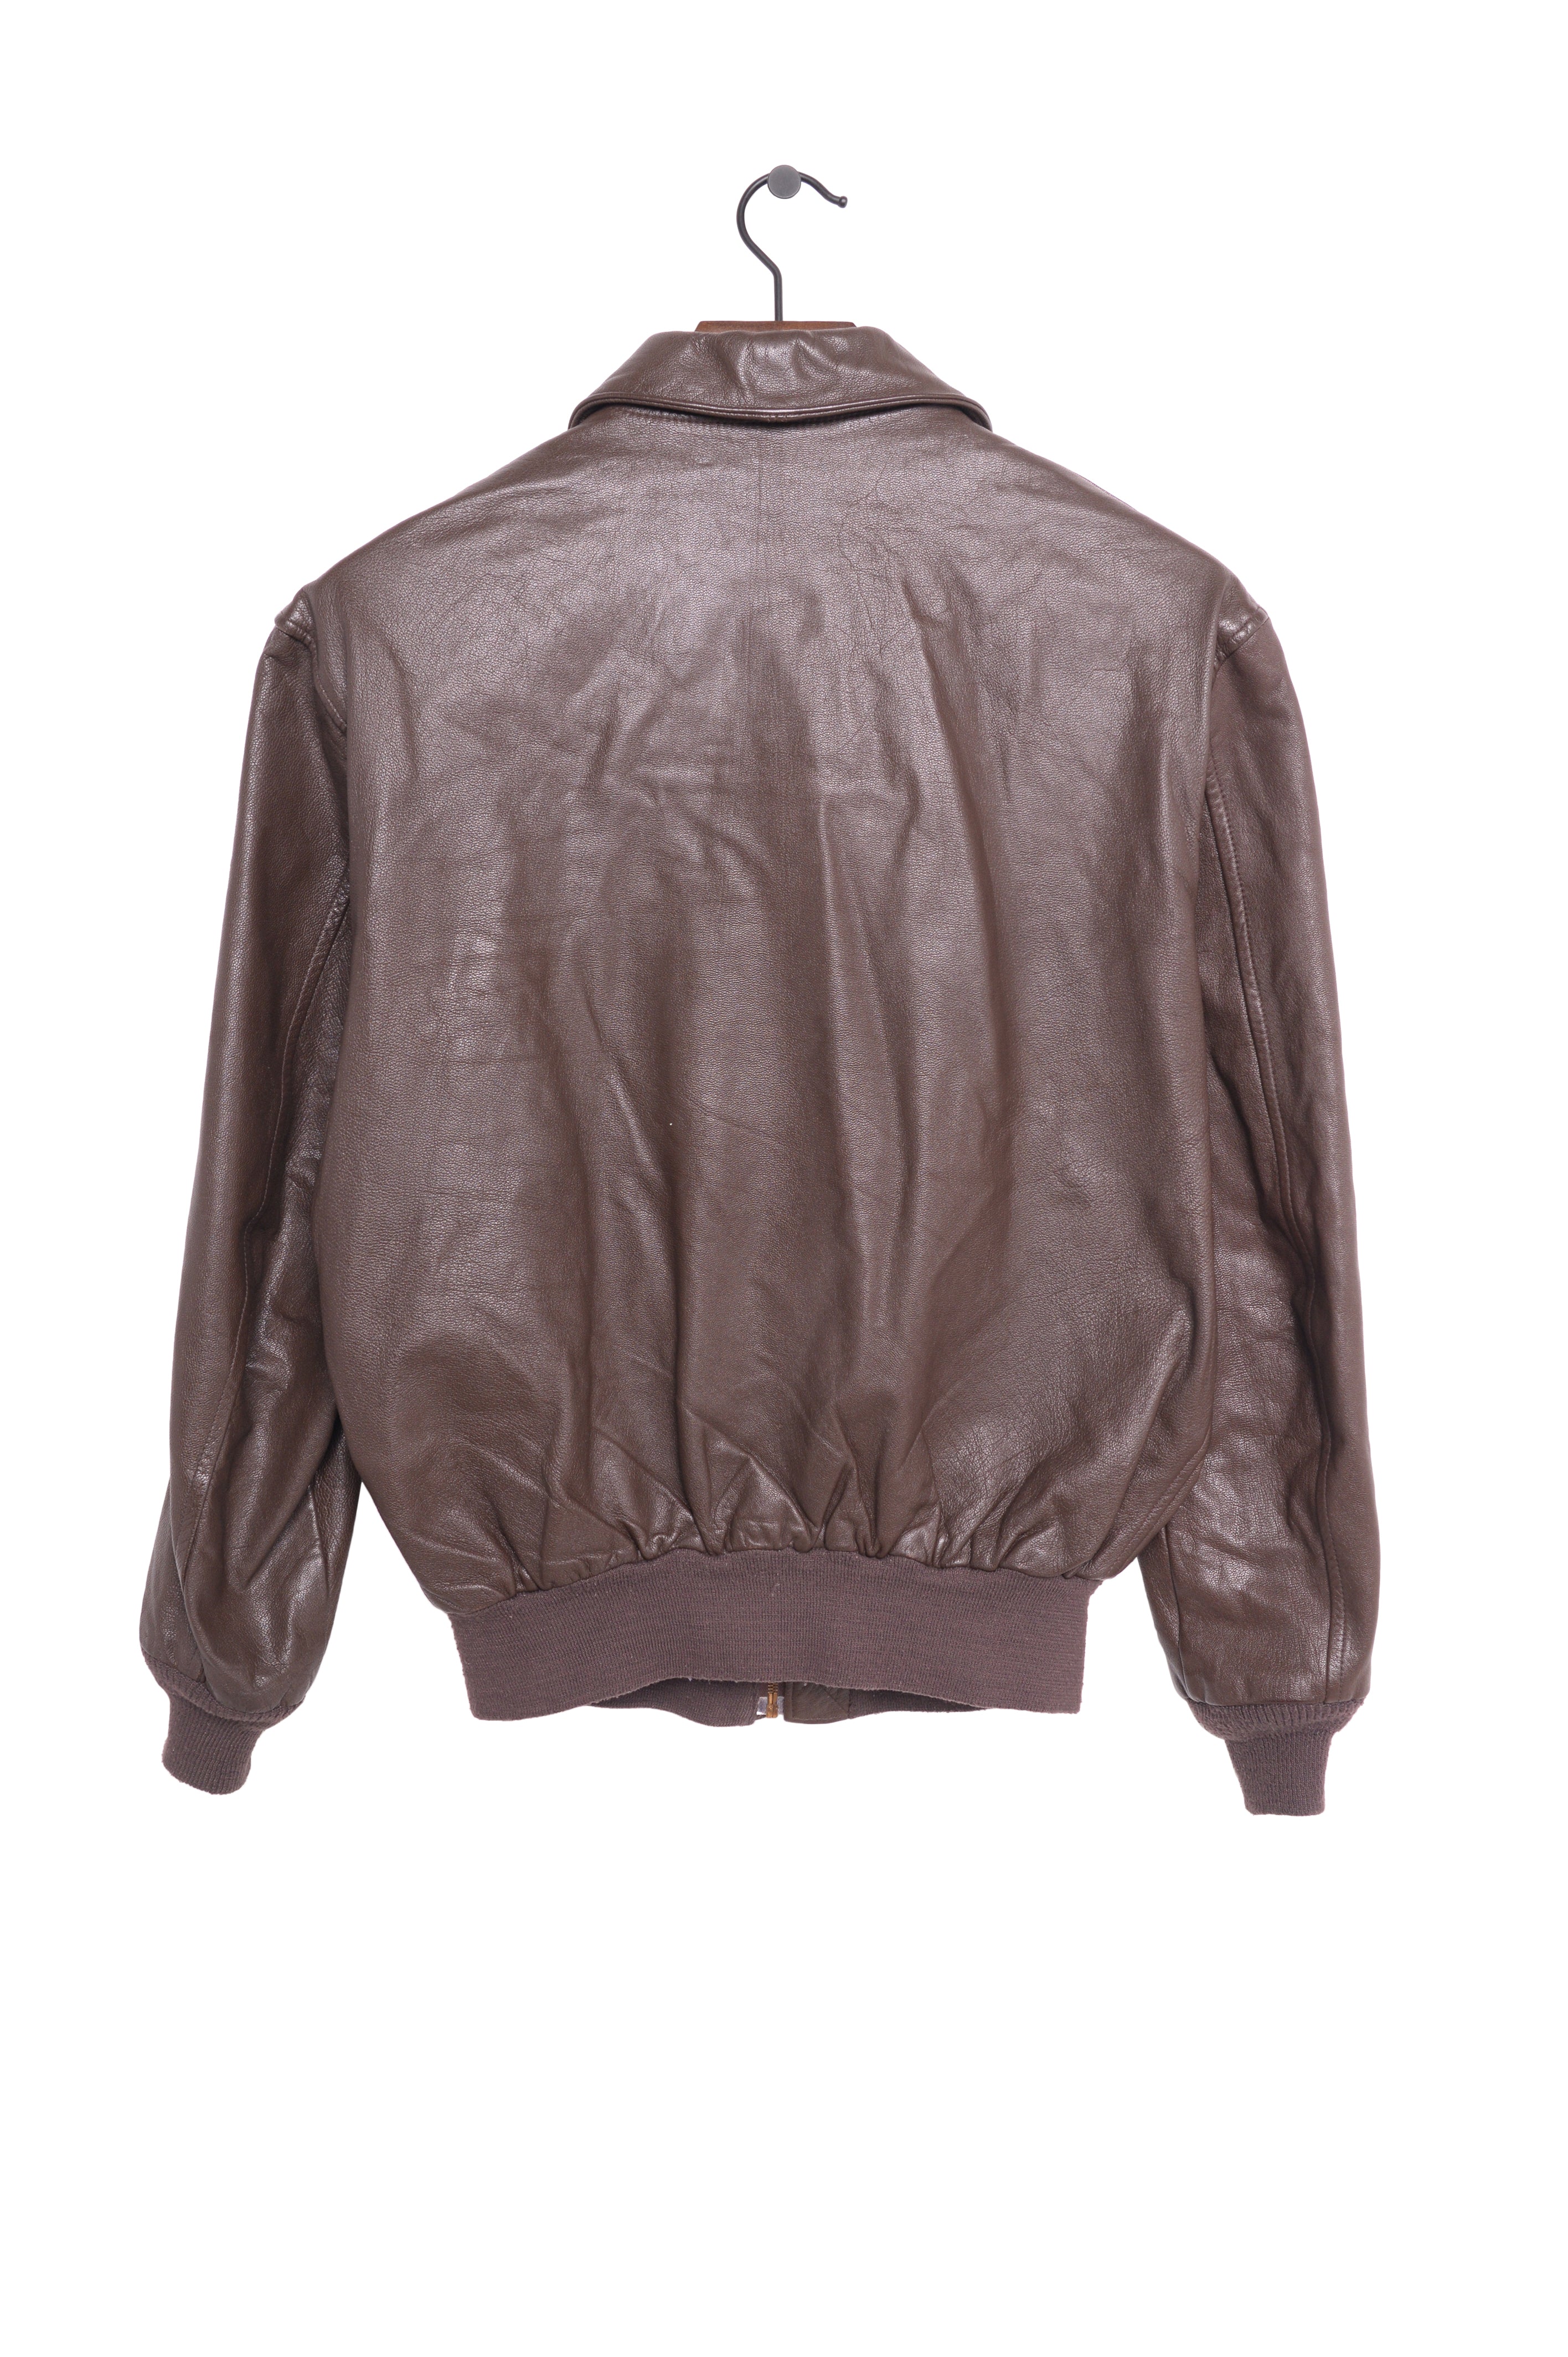 1980s Goatskin Leather Bomber USA Free Shipping - The Vintage